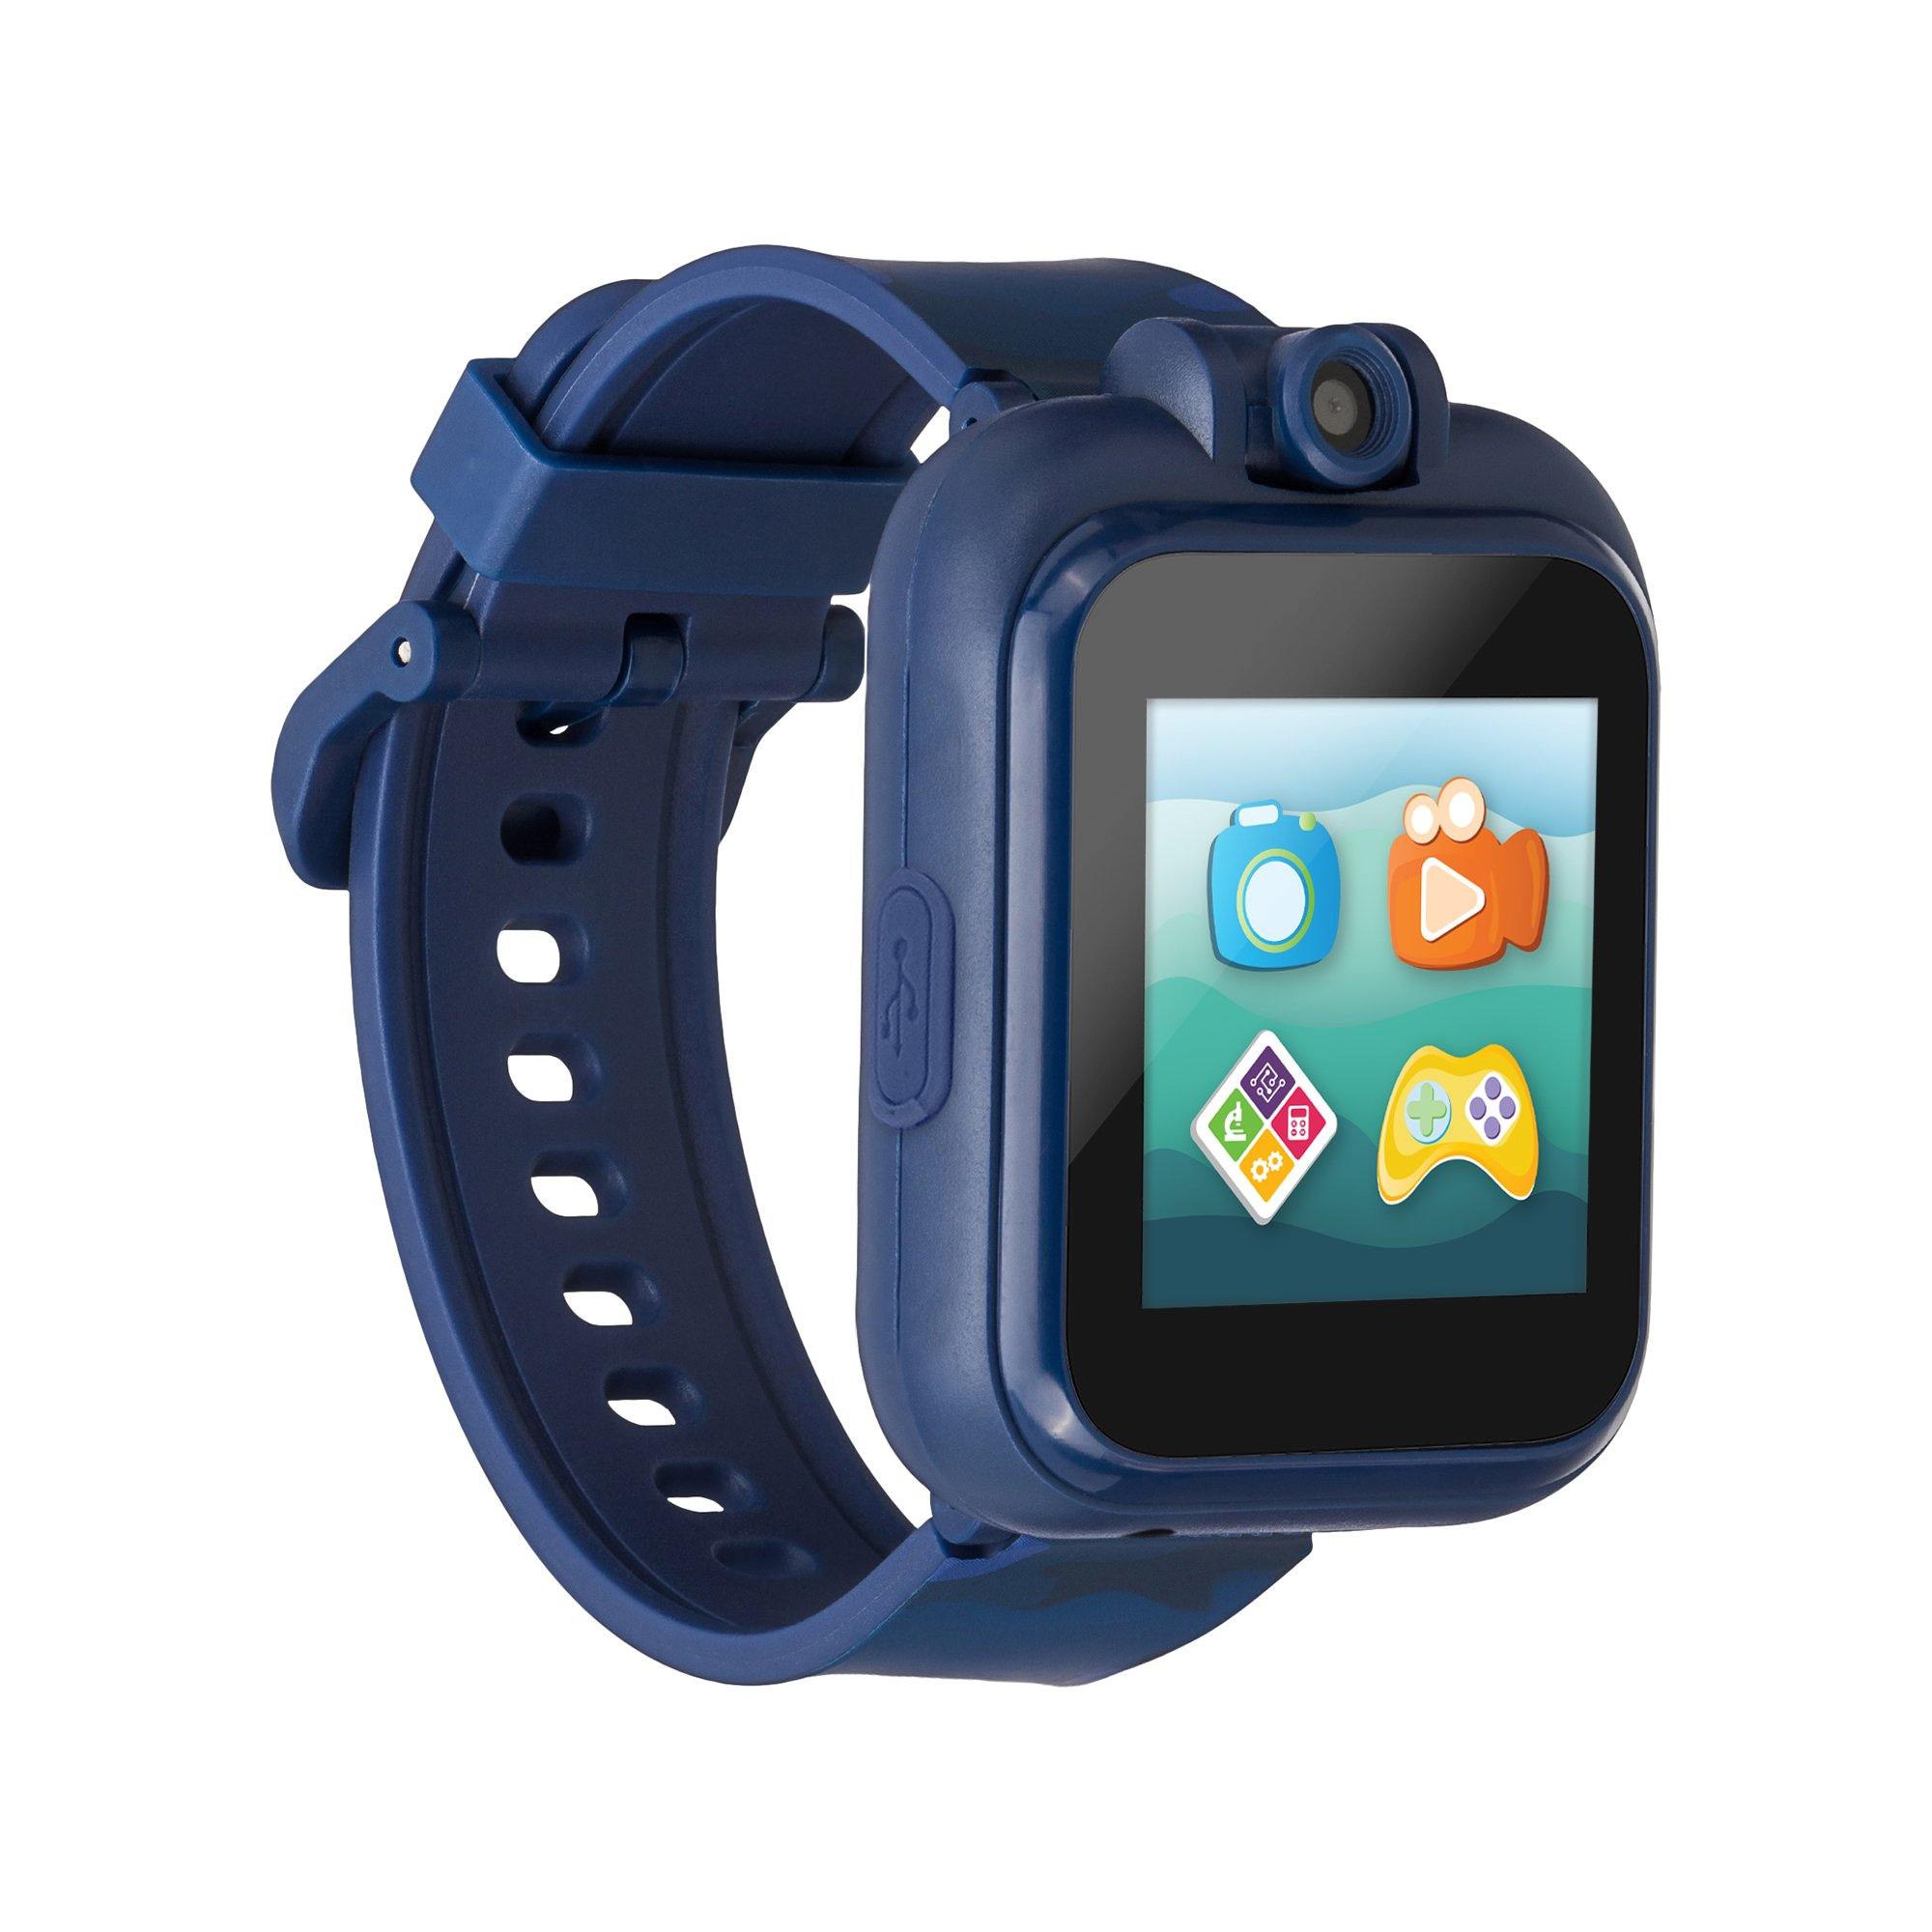 PlayZoom 2 Kids Smartwatch: Blue Camouflage Print affordable smart watch